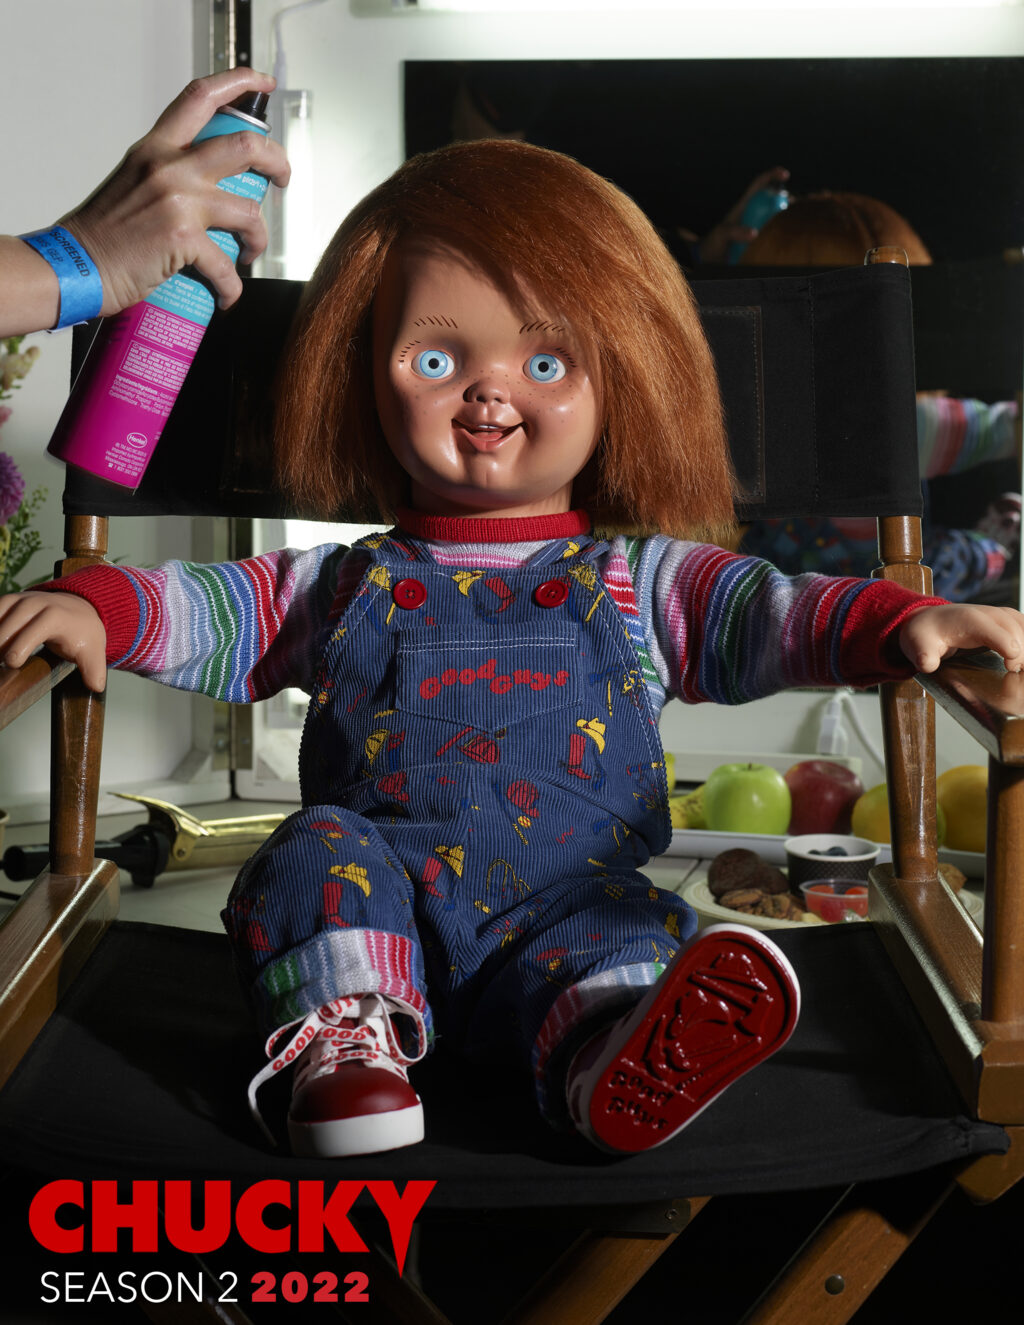 CHUCKY 2 PRESS COMP A 1024x1325 - 'Chucky' Is Renewed For Season 2 With New Poster And Video Message